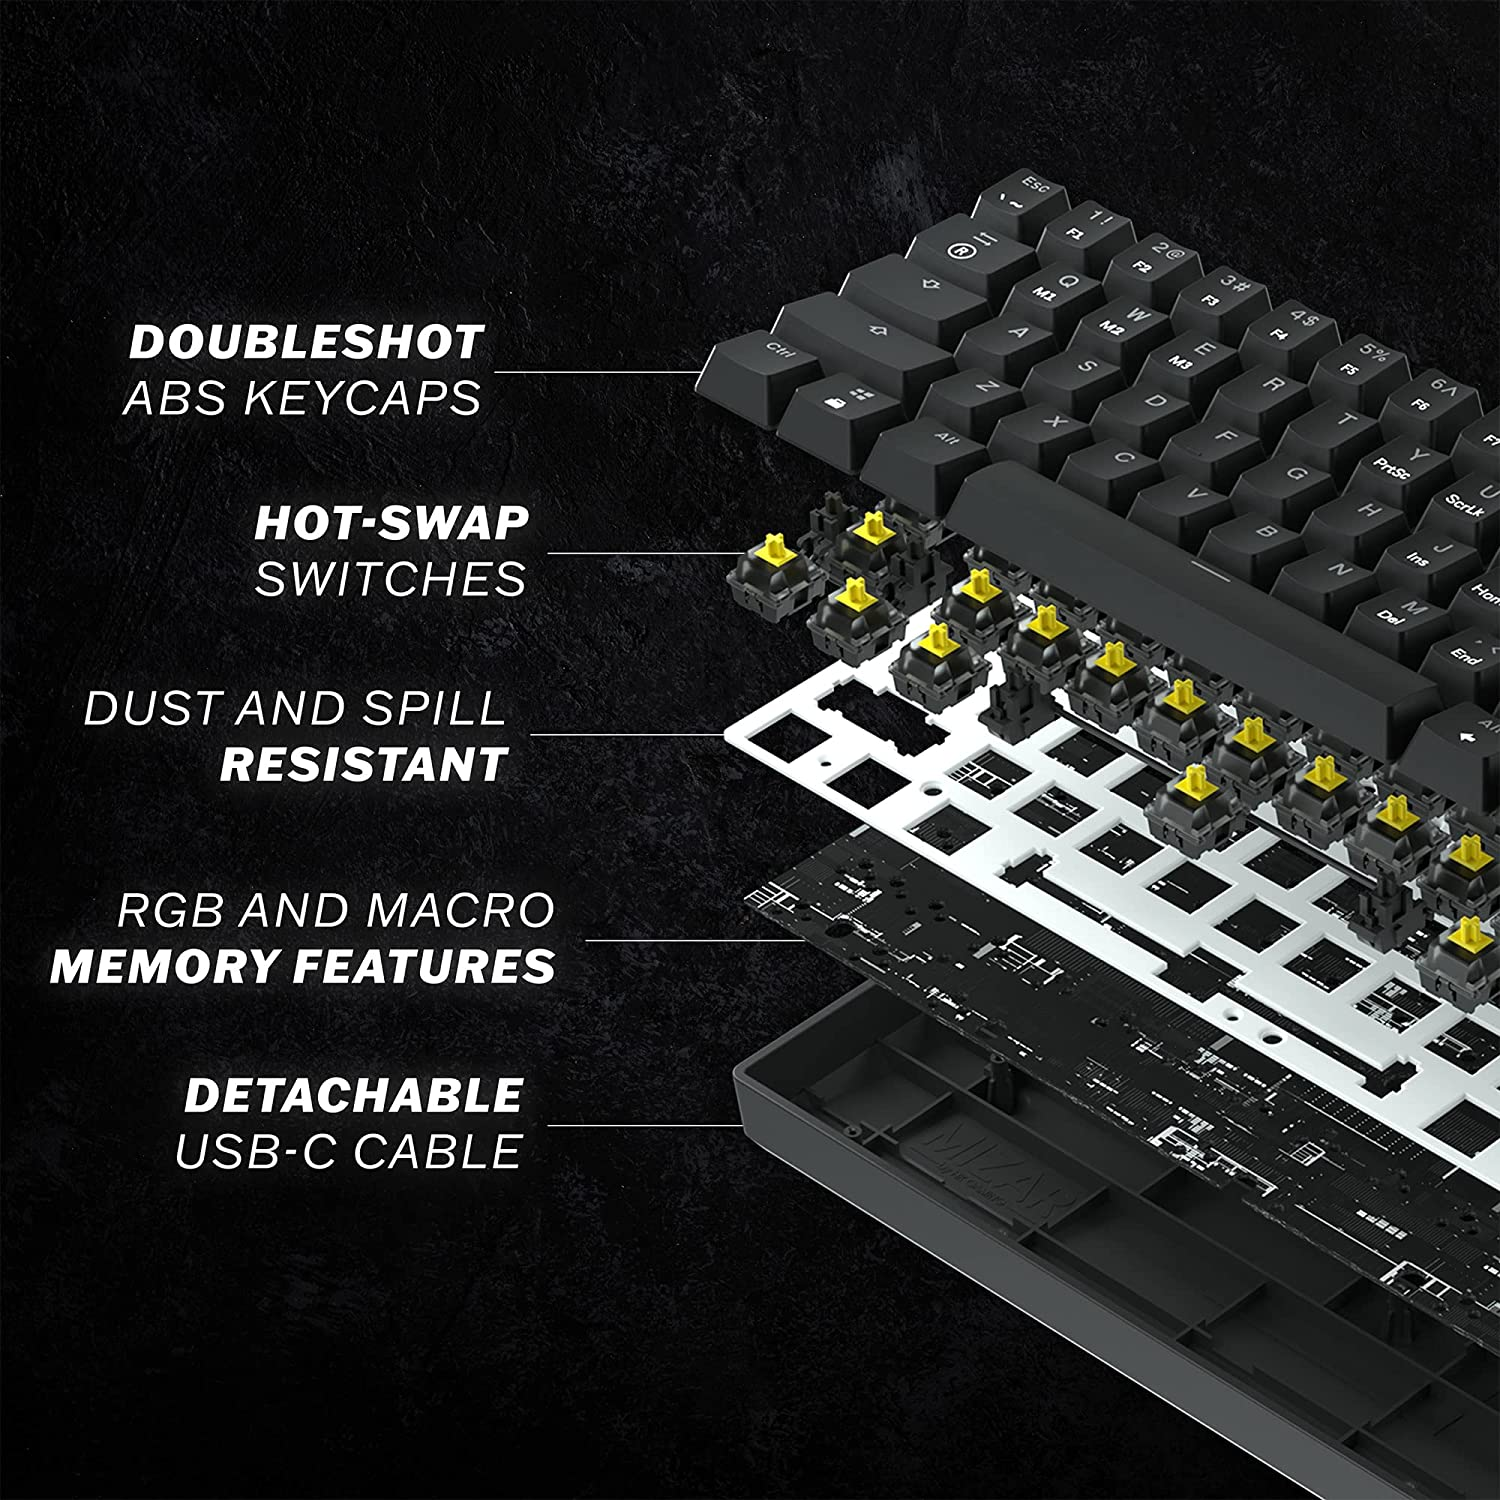 Hot-swappable gaming keyboards can have parts replaced which means that it will last longer and can be used long-term without having to be replaced.